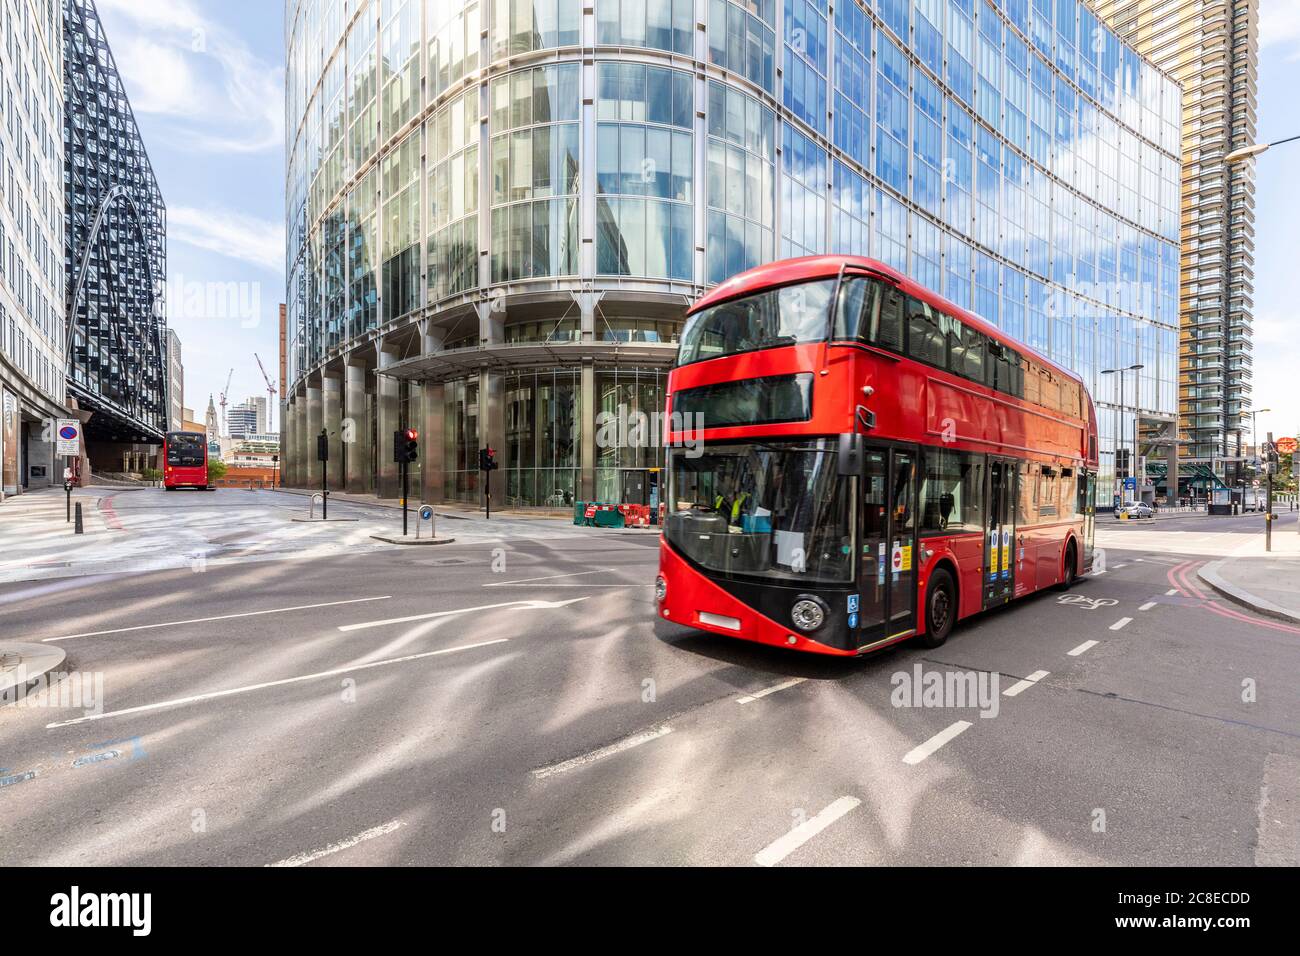 UK, London, Red double decker bus # with modern buildings in background Stock Photo